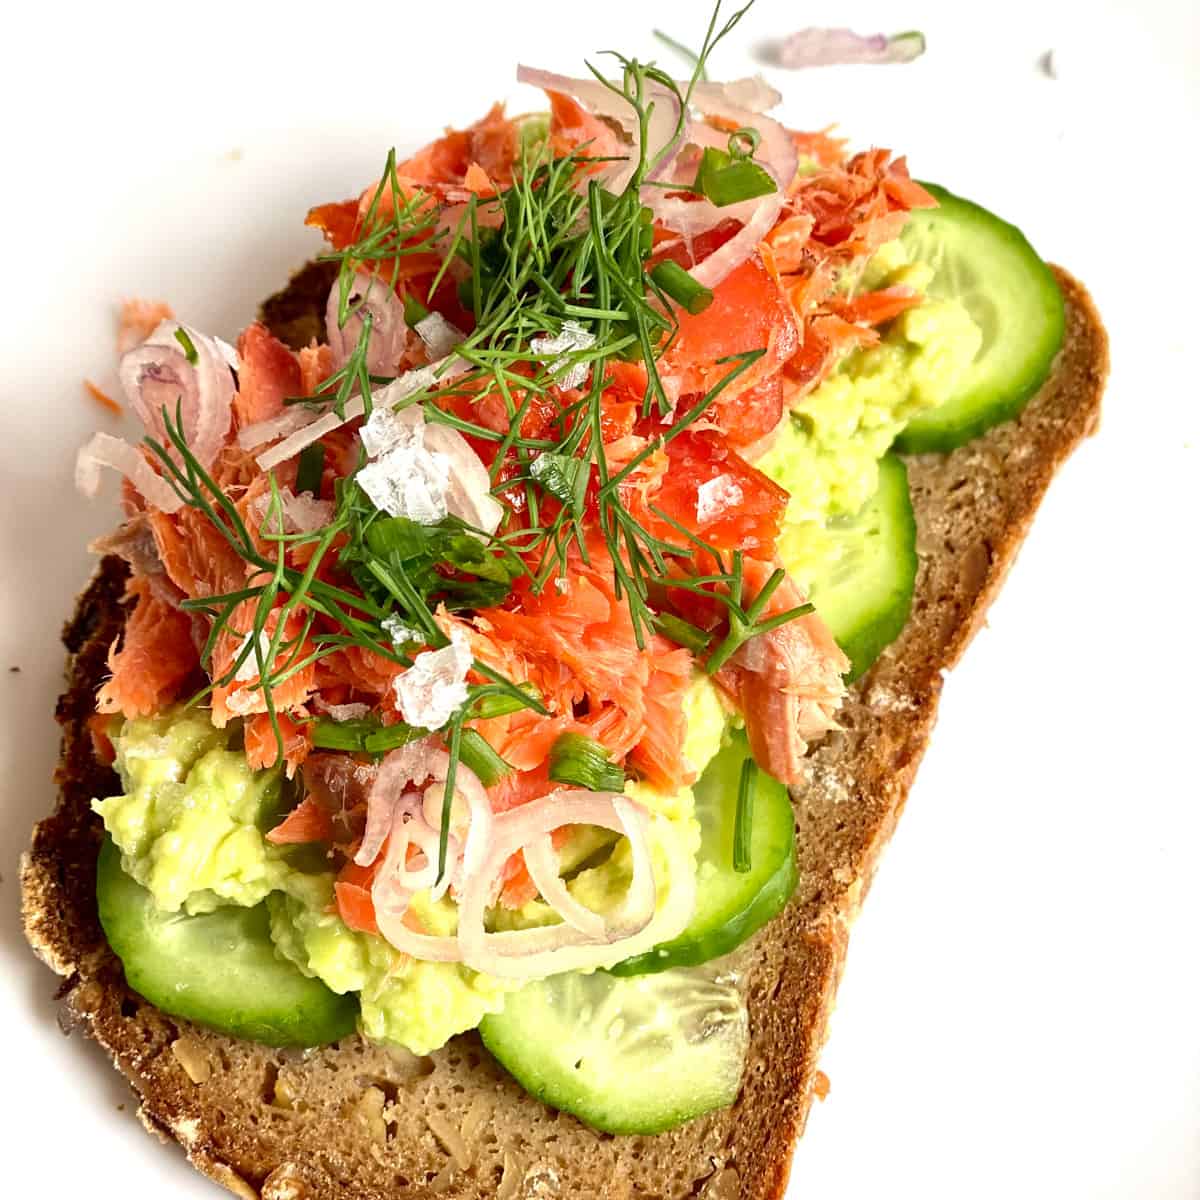 Toast with smoked salmon, cucumbers, dill, and shallots.